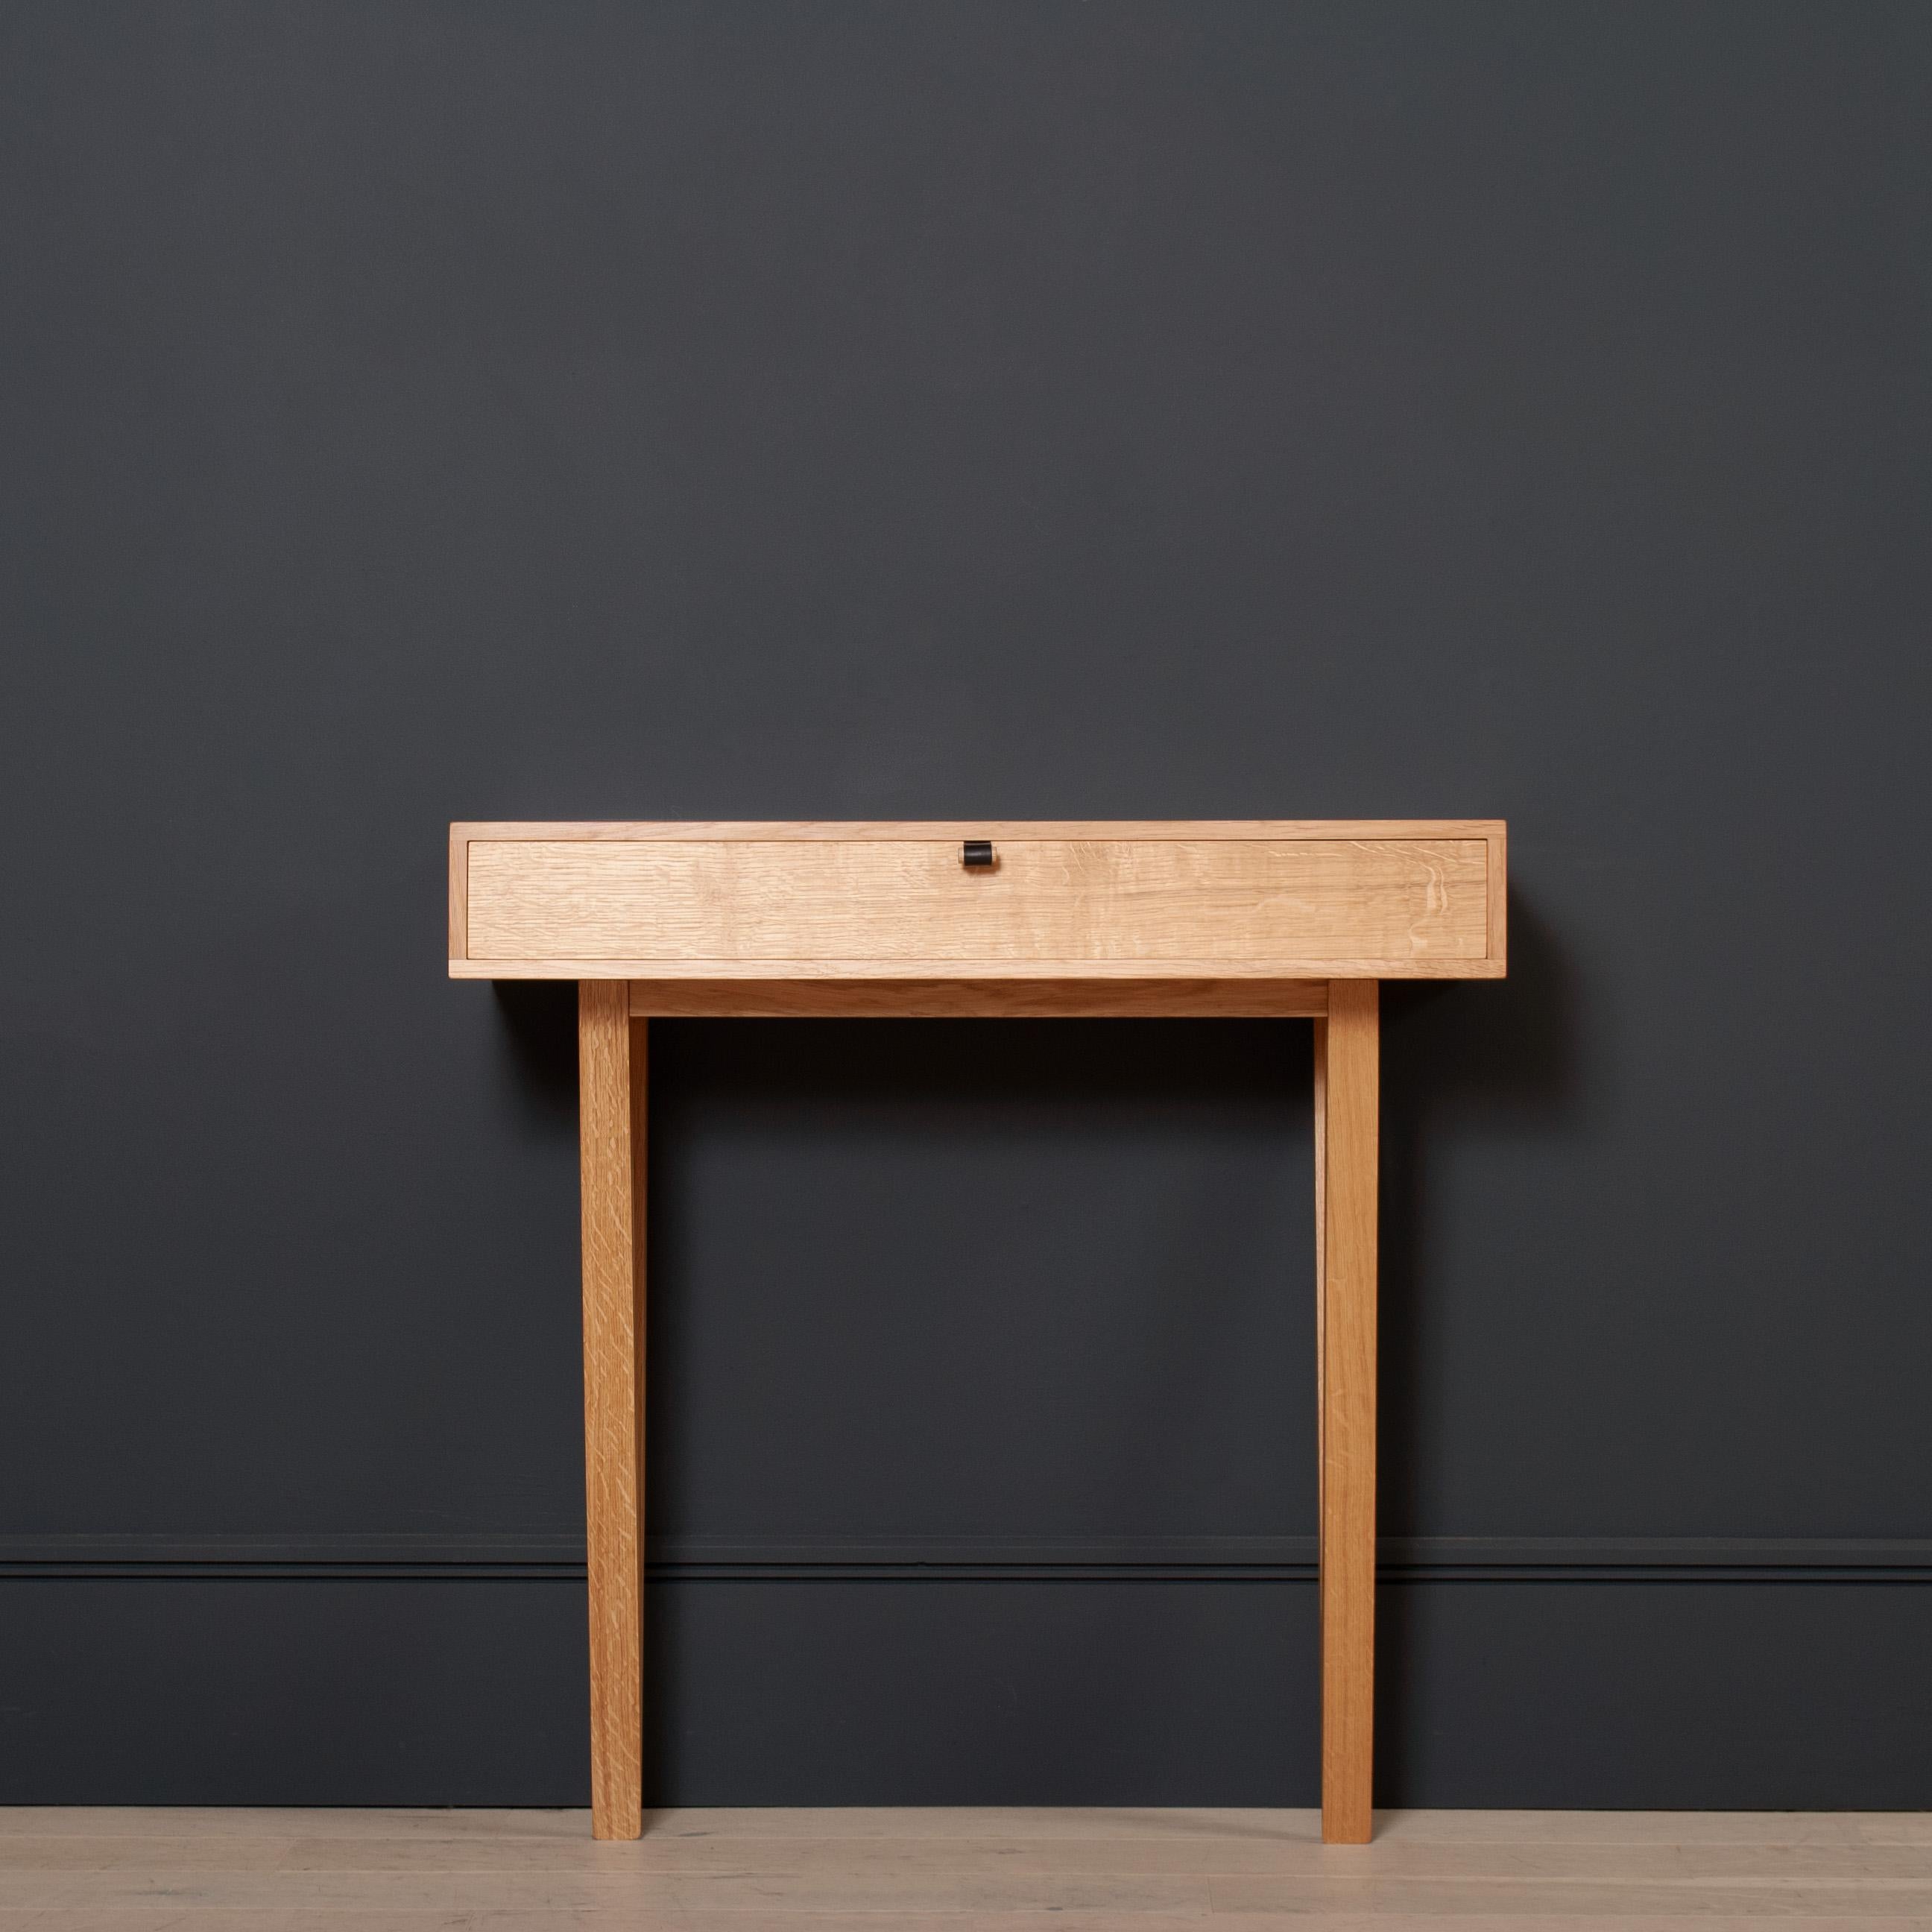 Modernist console table designed and handmade in England using traditional furniture making techniques. Completely handcrafted from fully quarter-sawn English oak. Hand dovetailed joints to the main oak box and inner drawer parts. Can also be used